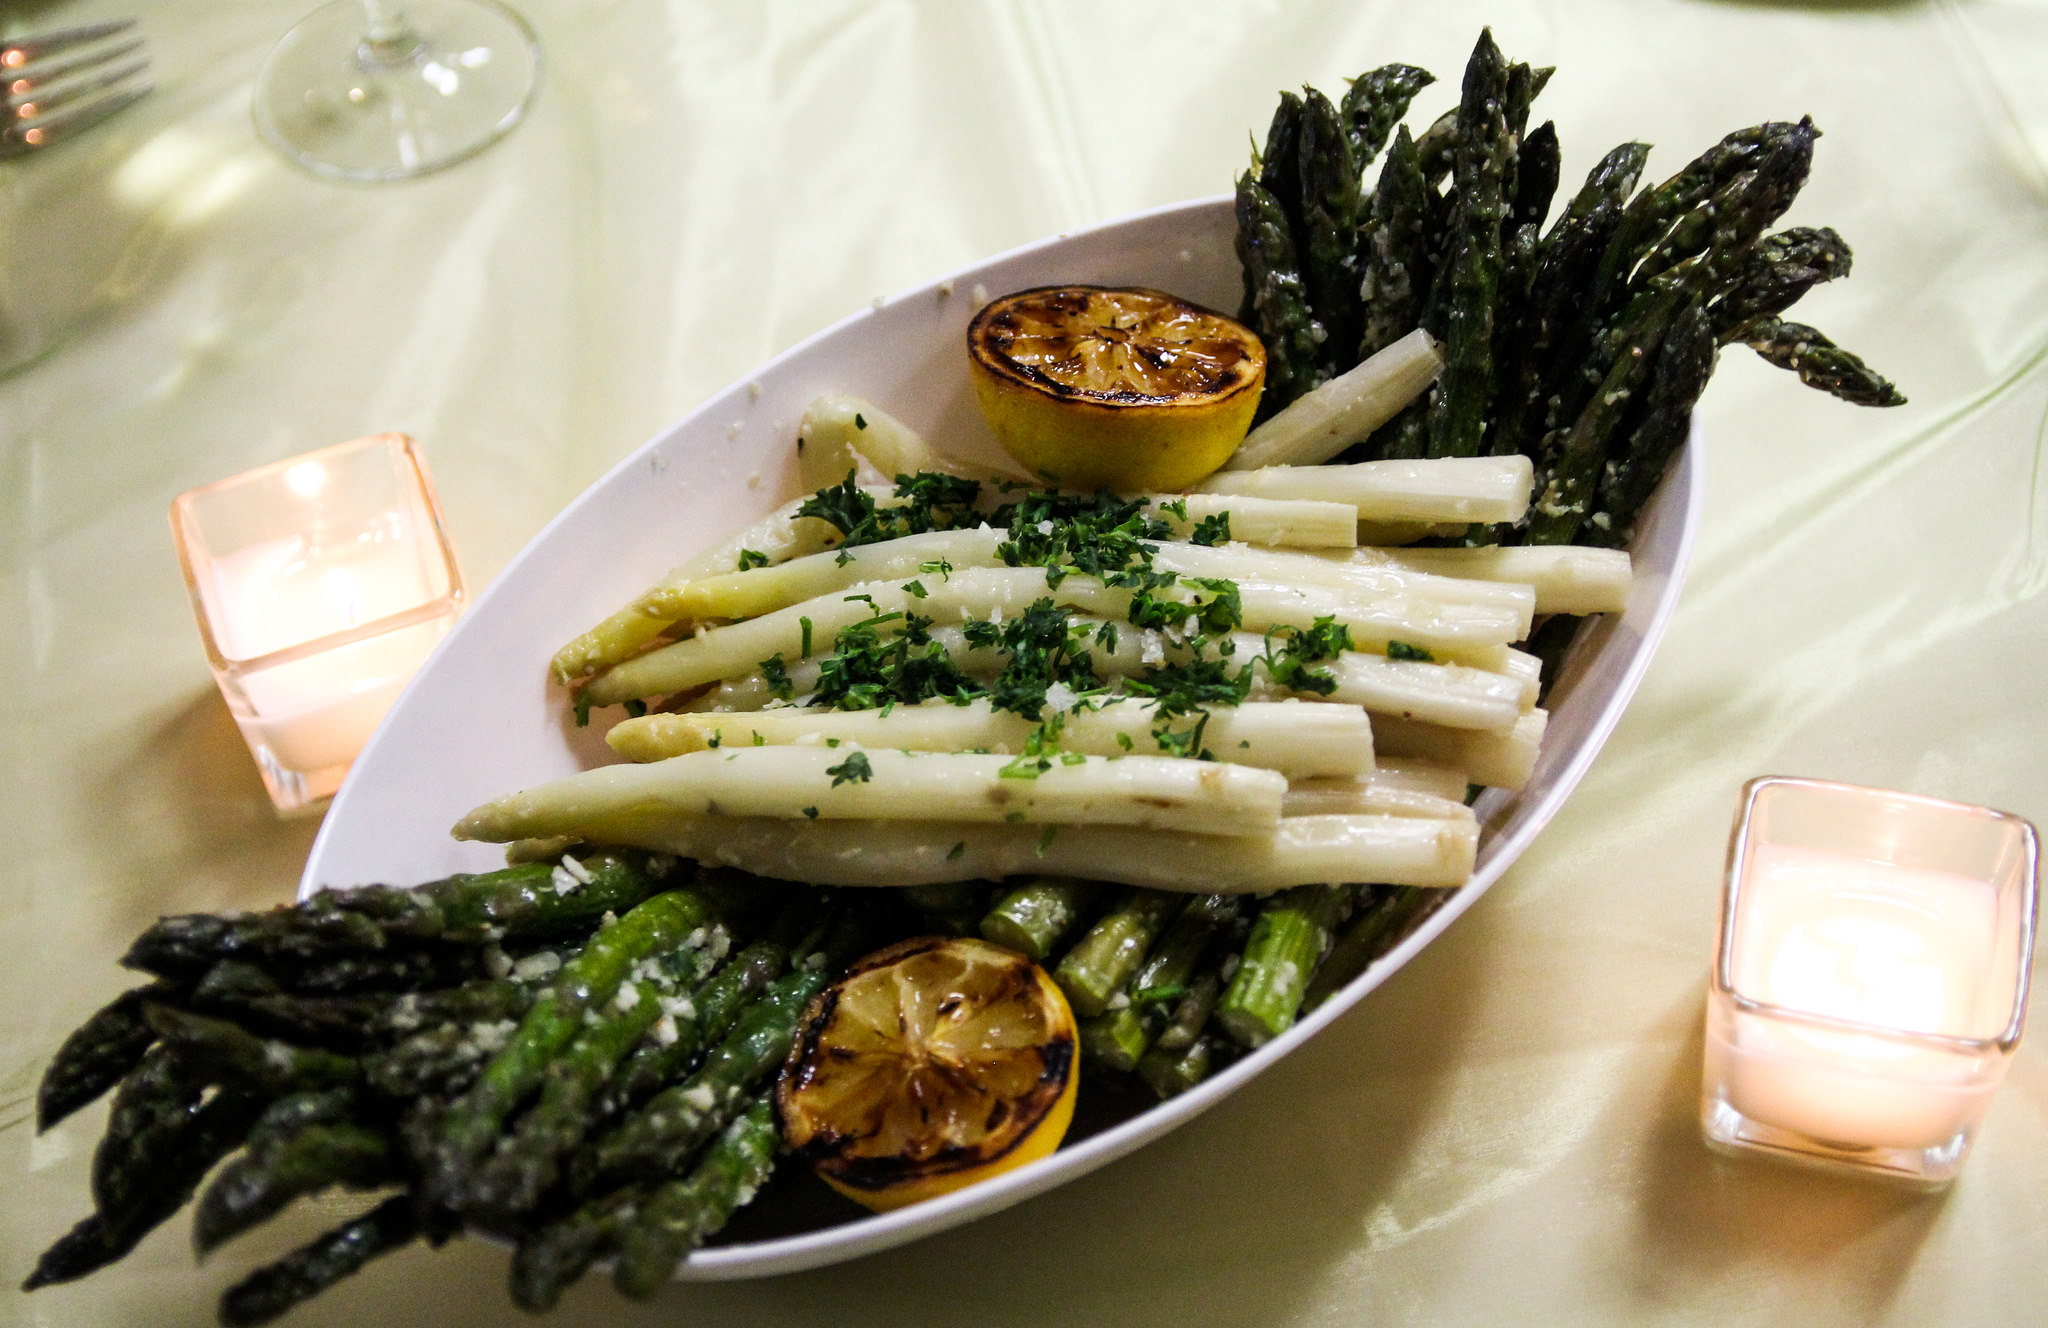 A dish of Asparagus with grilled lemon halves.